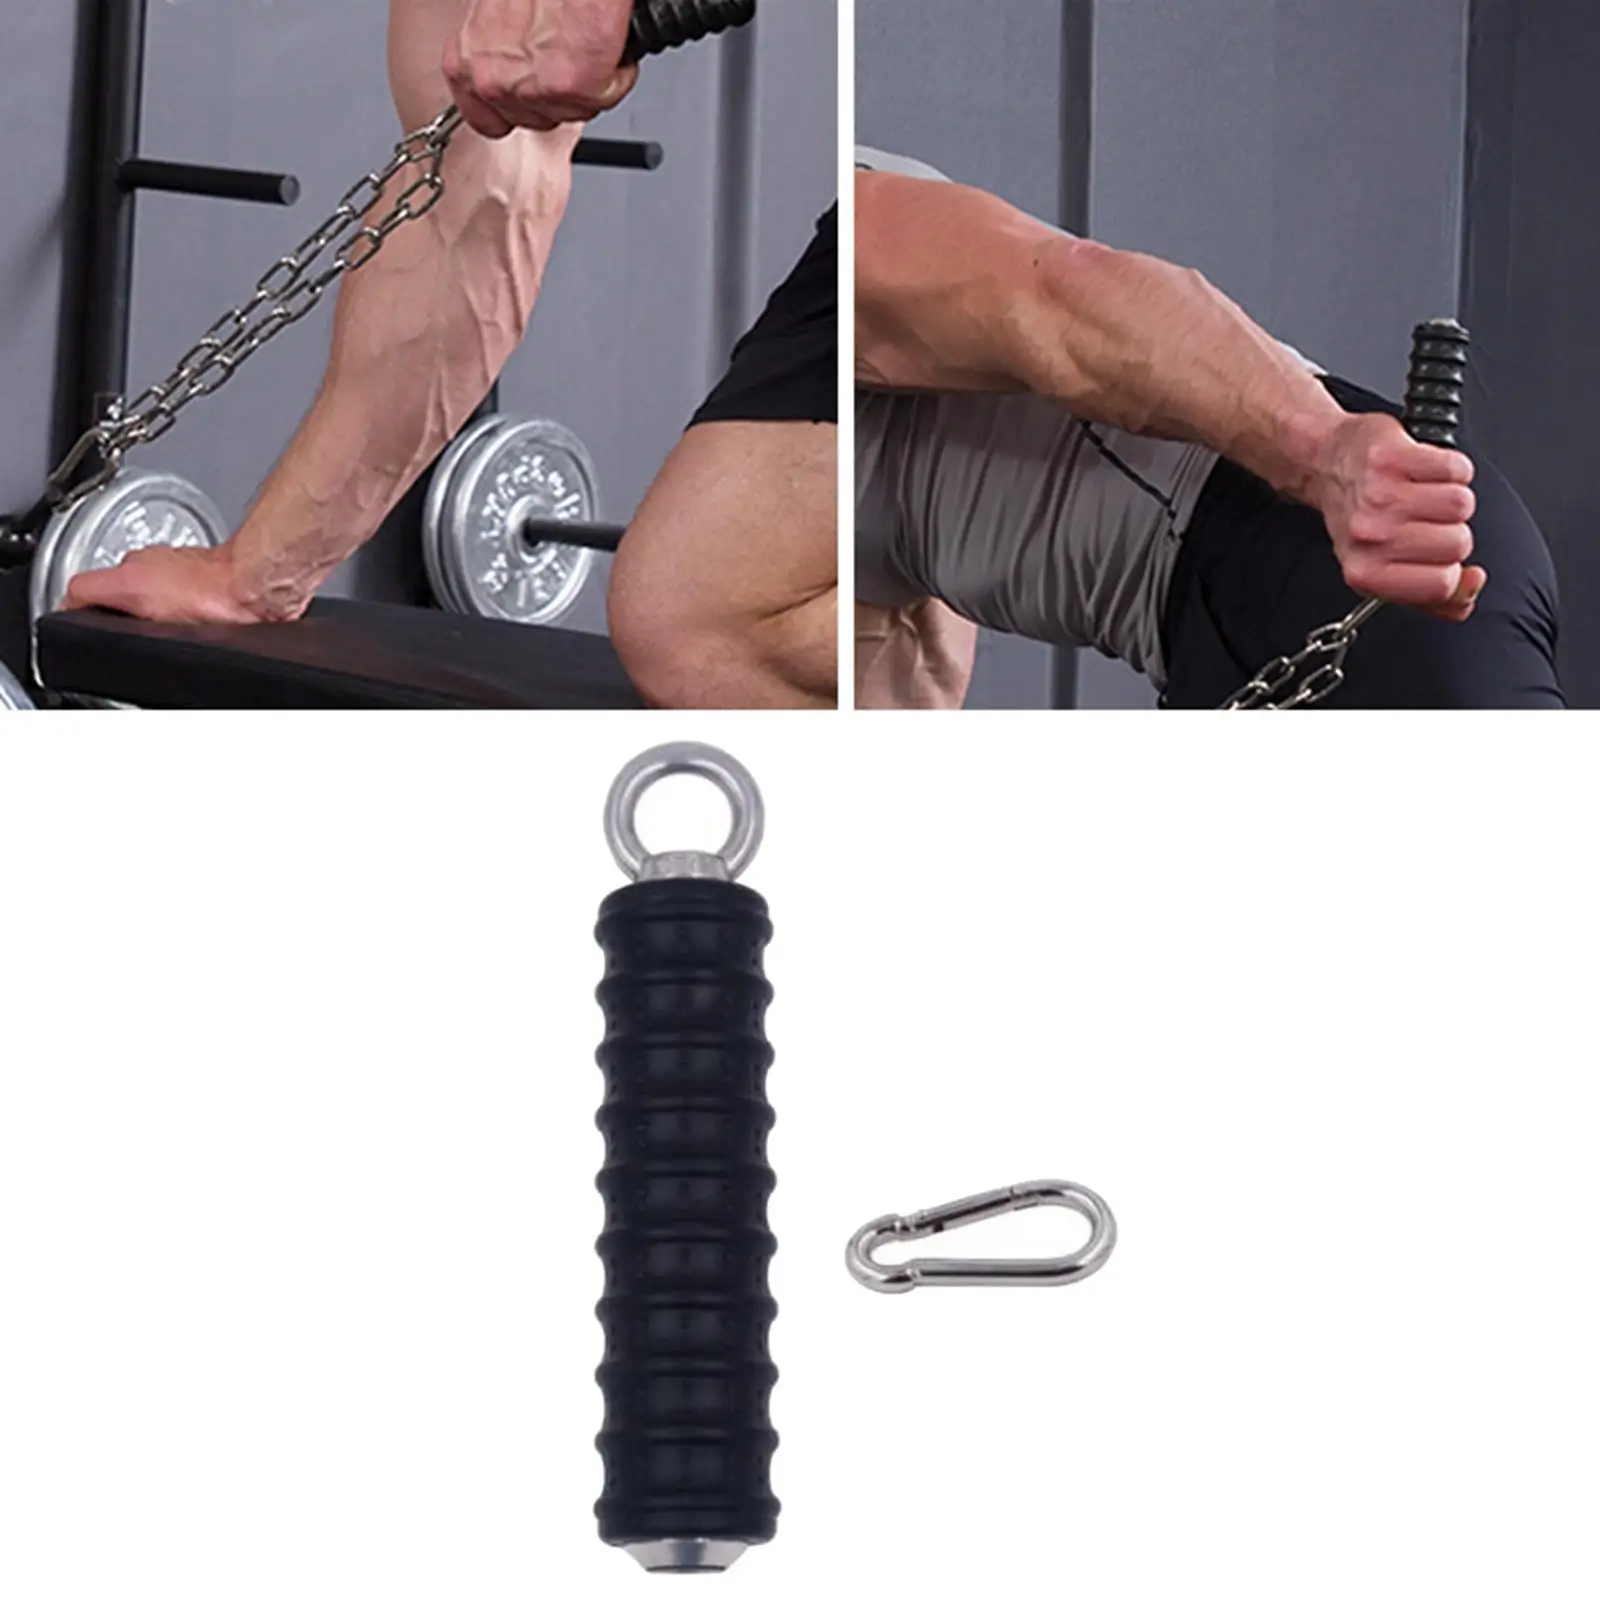 2x Pull Up Handle Grip Strength Core Workout Arm Training Tool